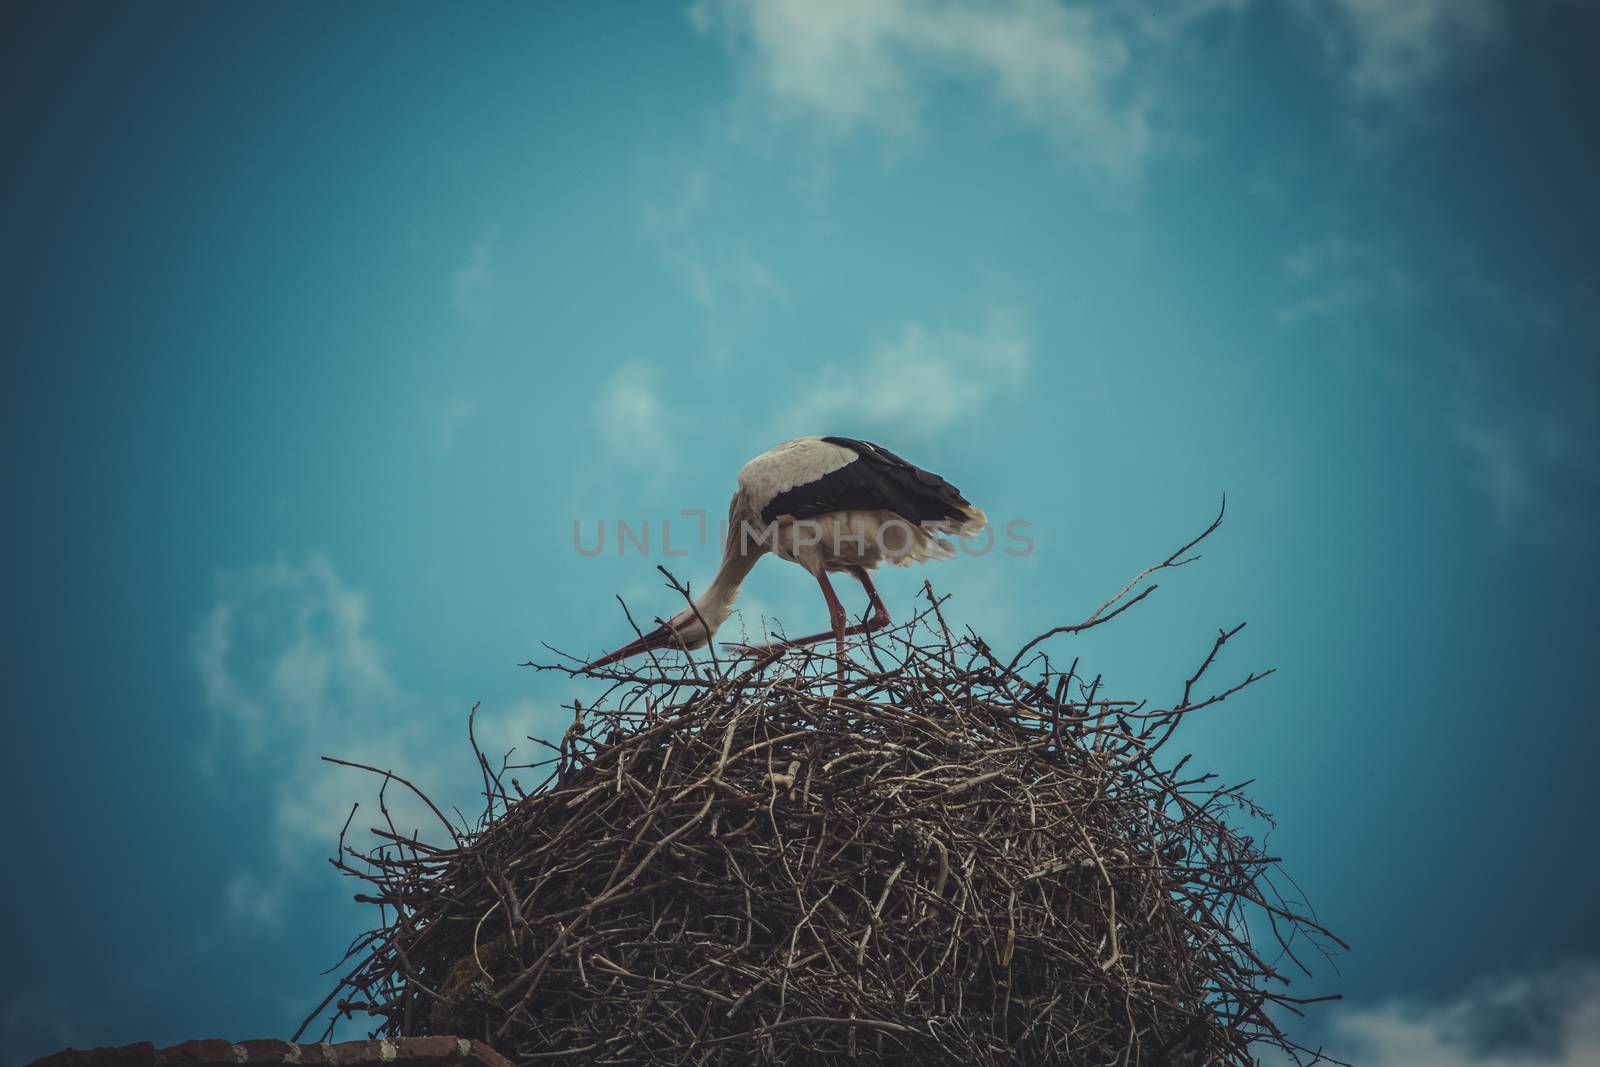 Procreation, Stork nest made ������of tree branches over blue sky in dramatic